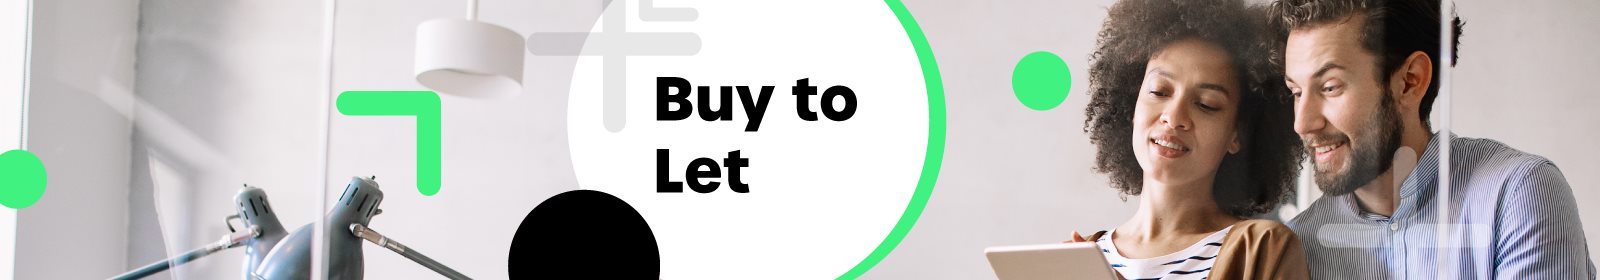 Buy-to-let guide: Investing in buy-to-let property